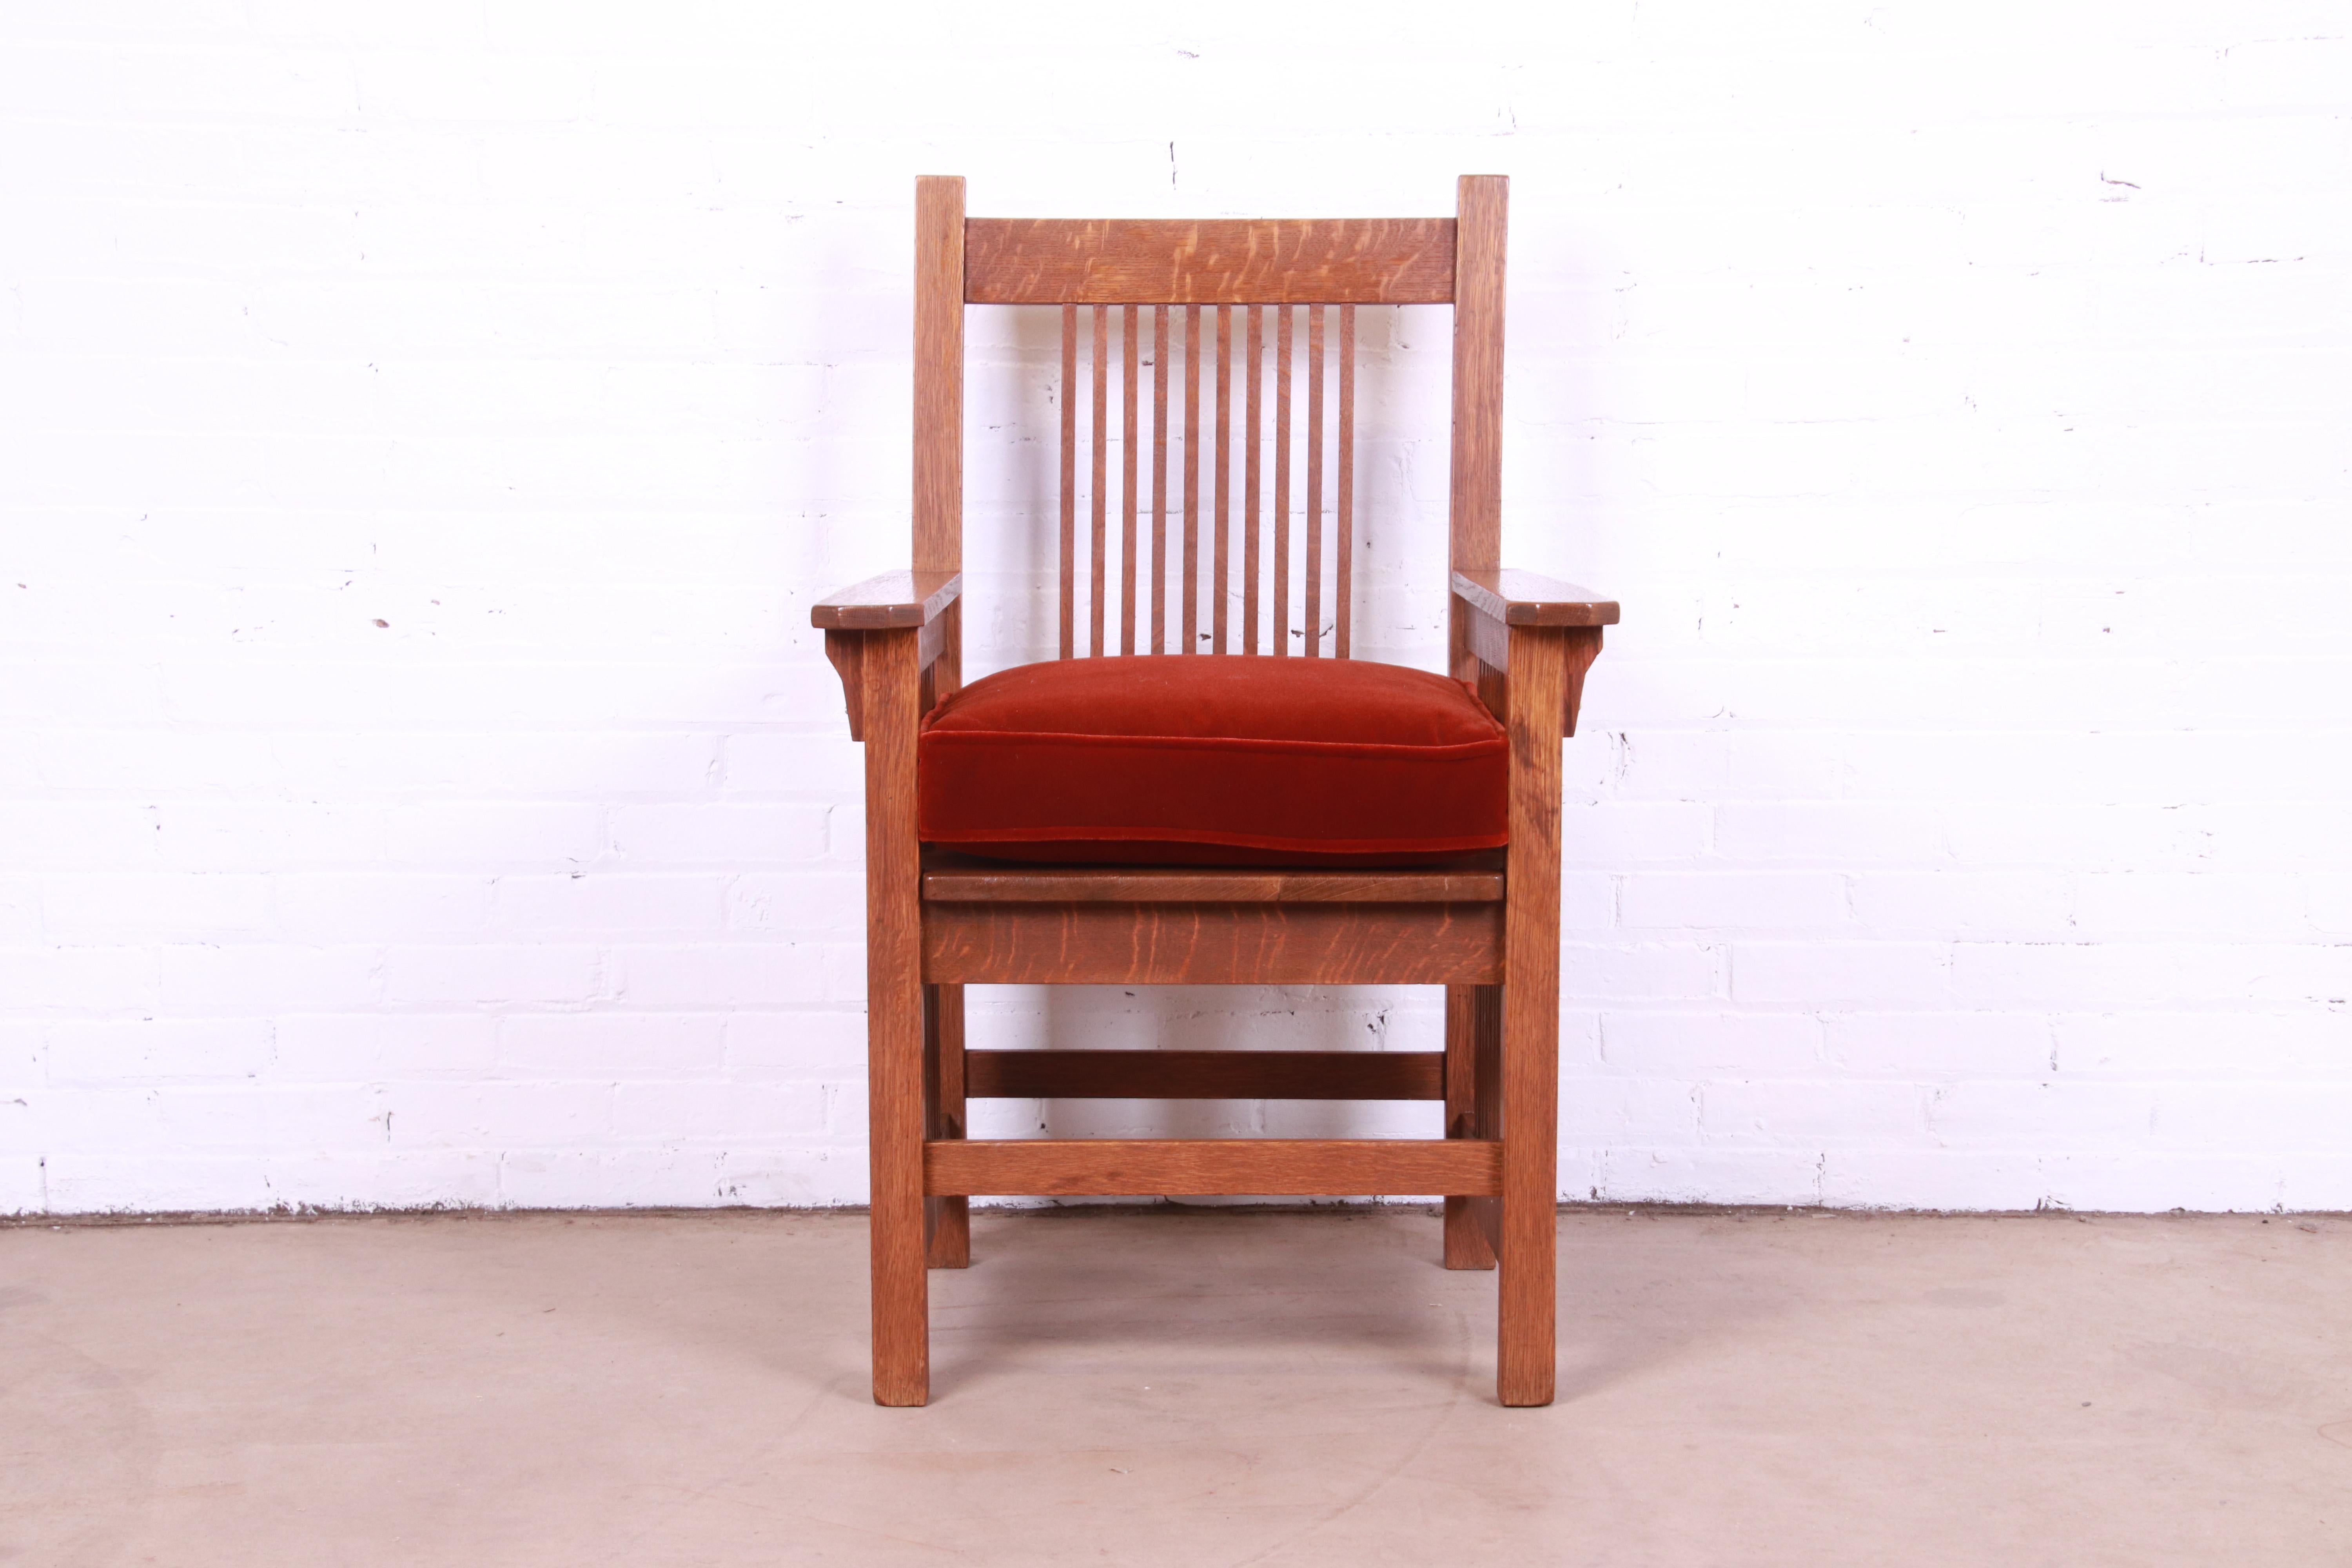 A gorgeous Mission oak Arts & Crafts spindle armchair, club chair, or lounge chair

Recently procured from Frank Lloyd Wright's DeRhodes House

Attributed to Stickley

USA, Circa 1900

Solid quarter sawn oak, with newer red velvet